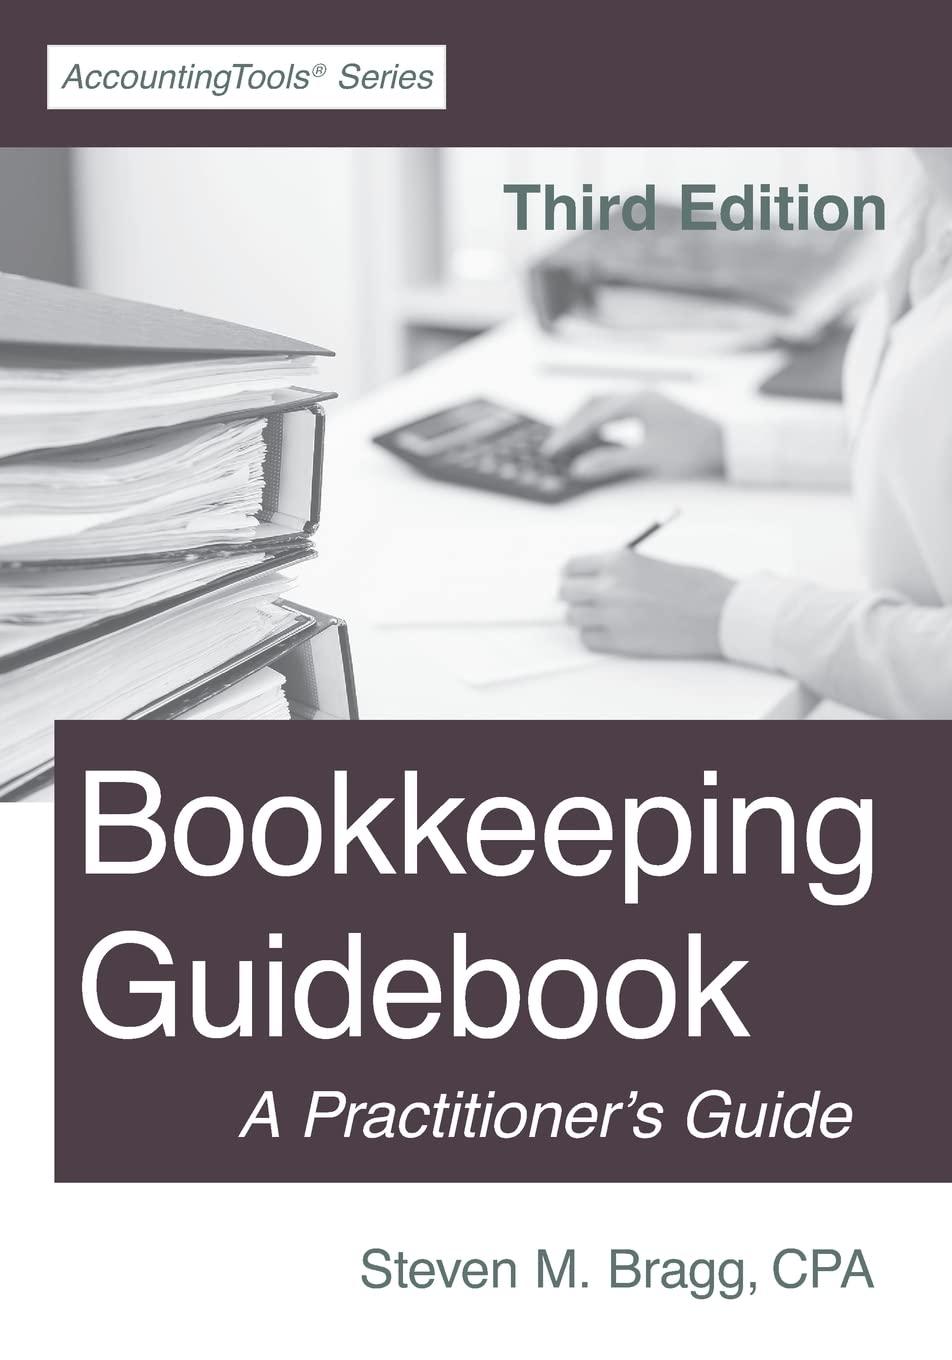 bookkeeping guidebook a practitioners guide 3rd edition steven m. bragg 1642210498, 978-1642210491